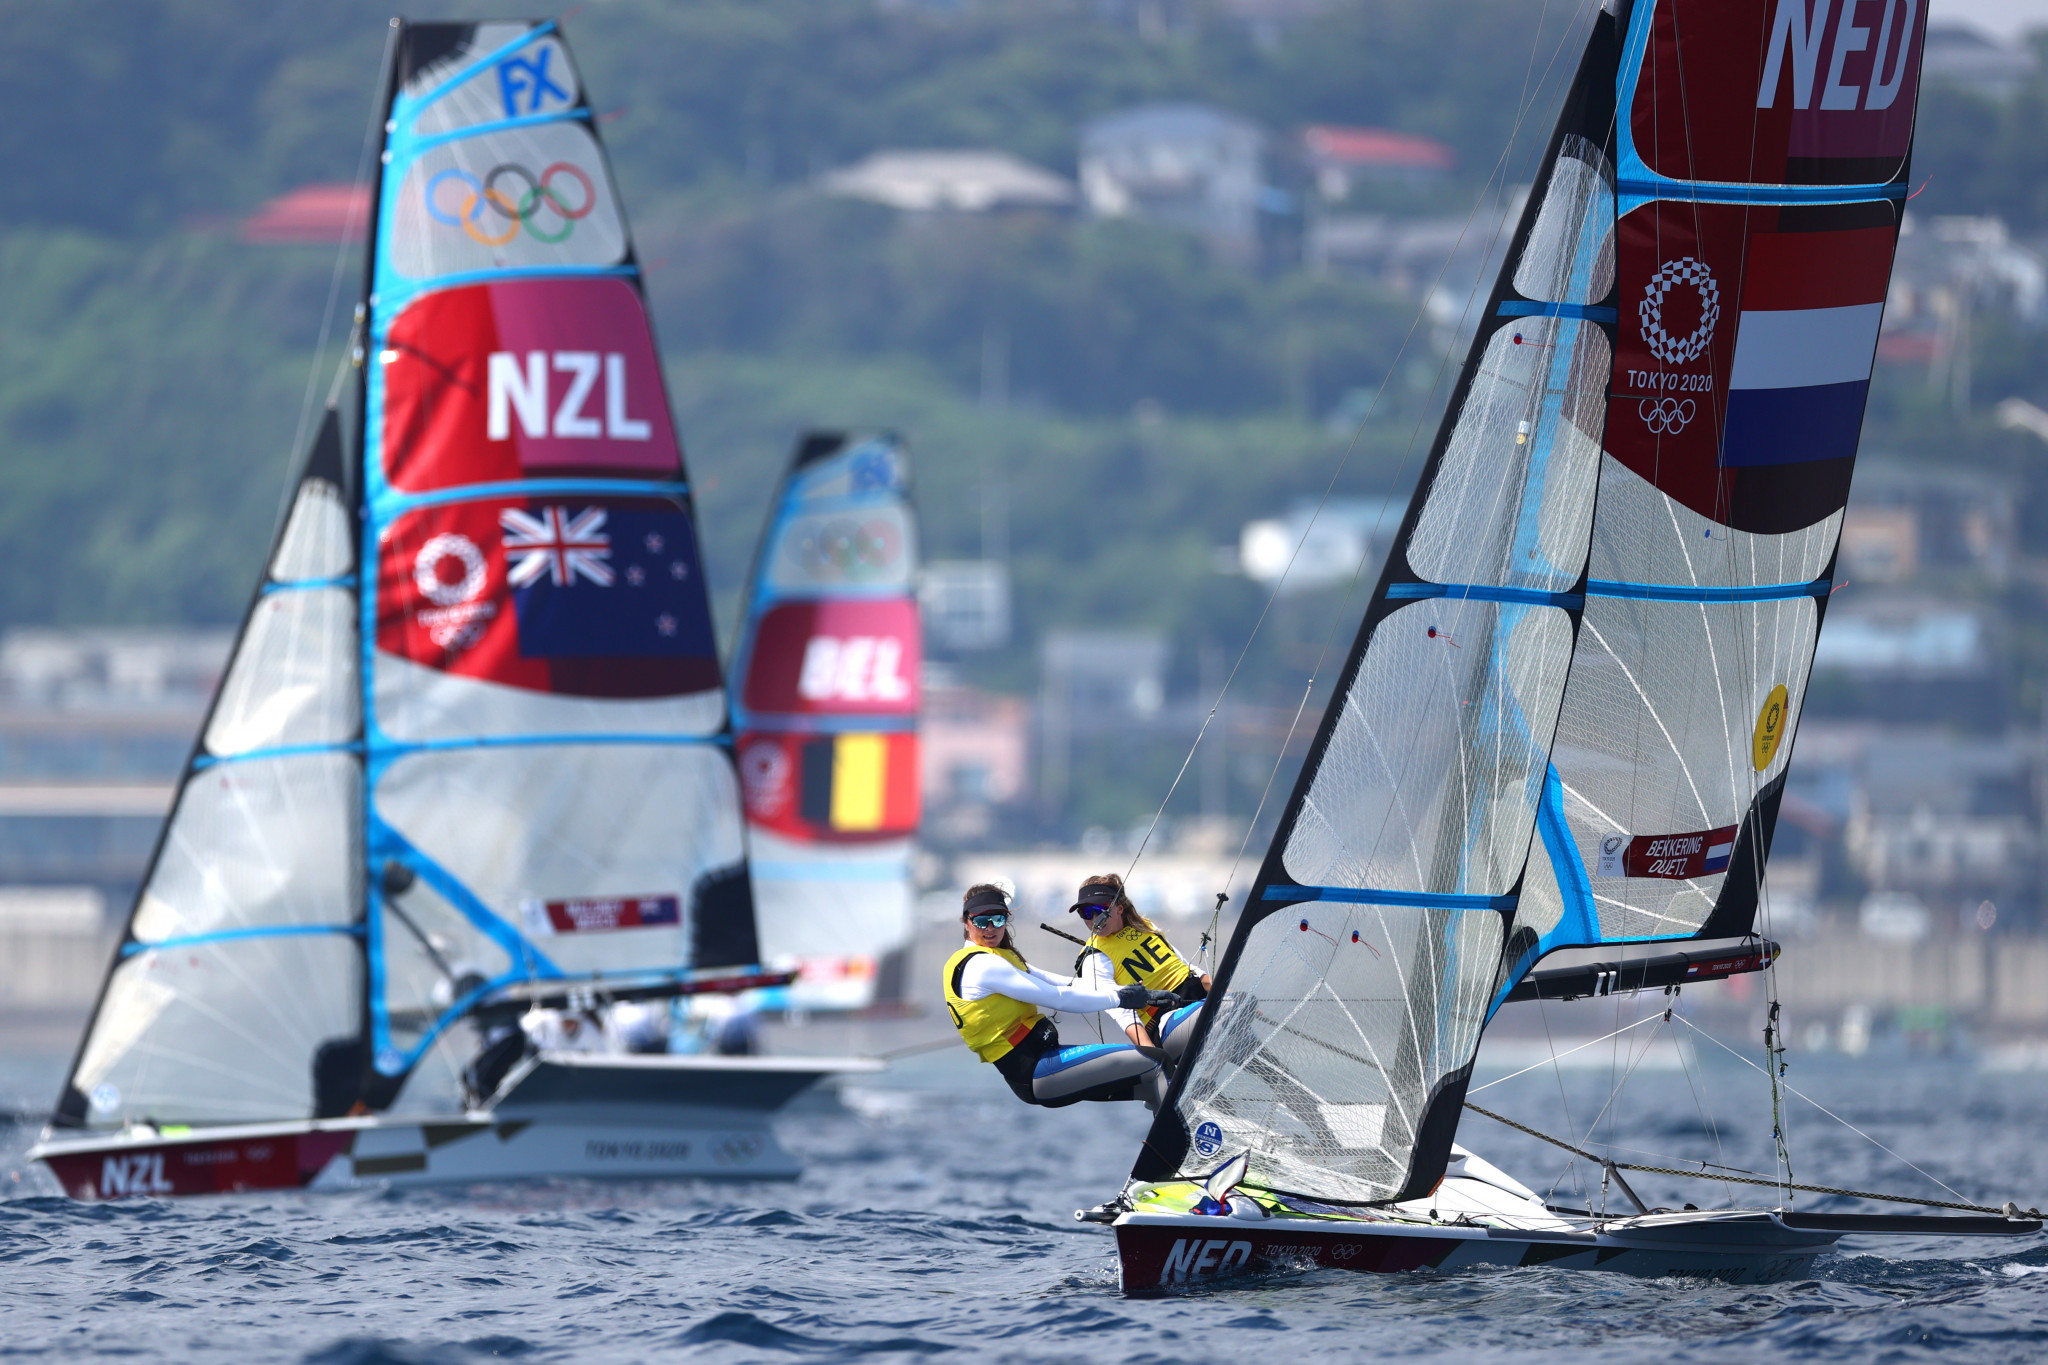 The Netherlands enjoyed success in the 49erFX event ©Getty Images